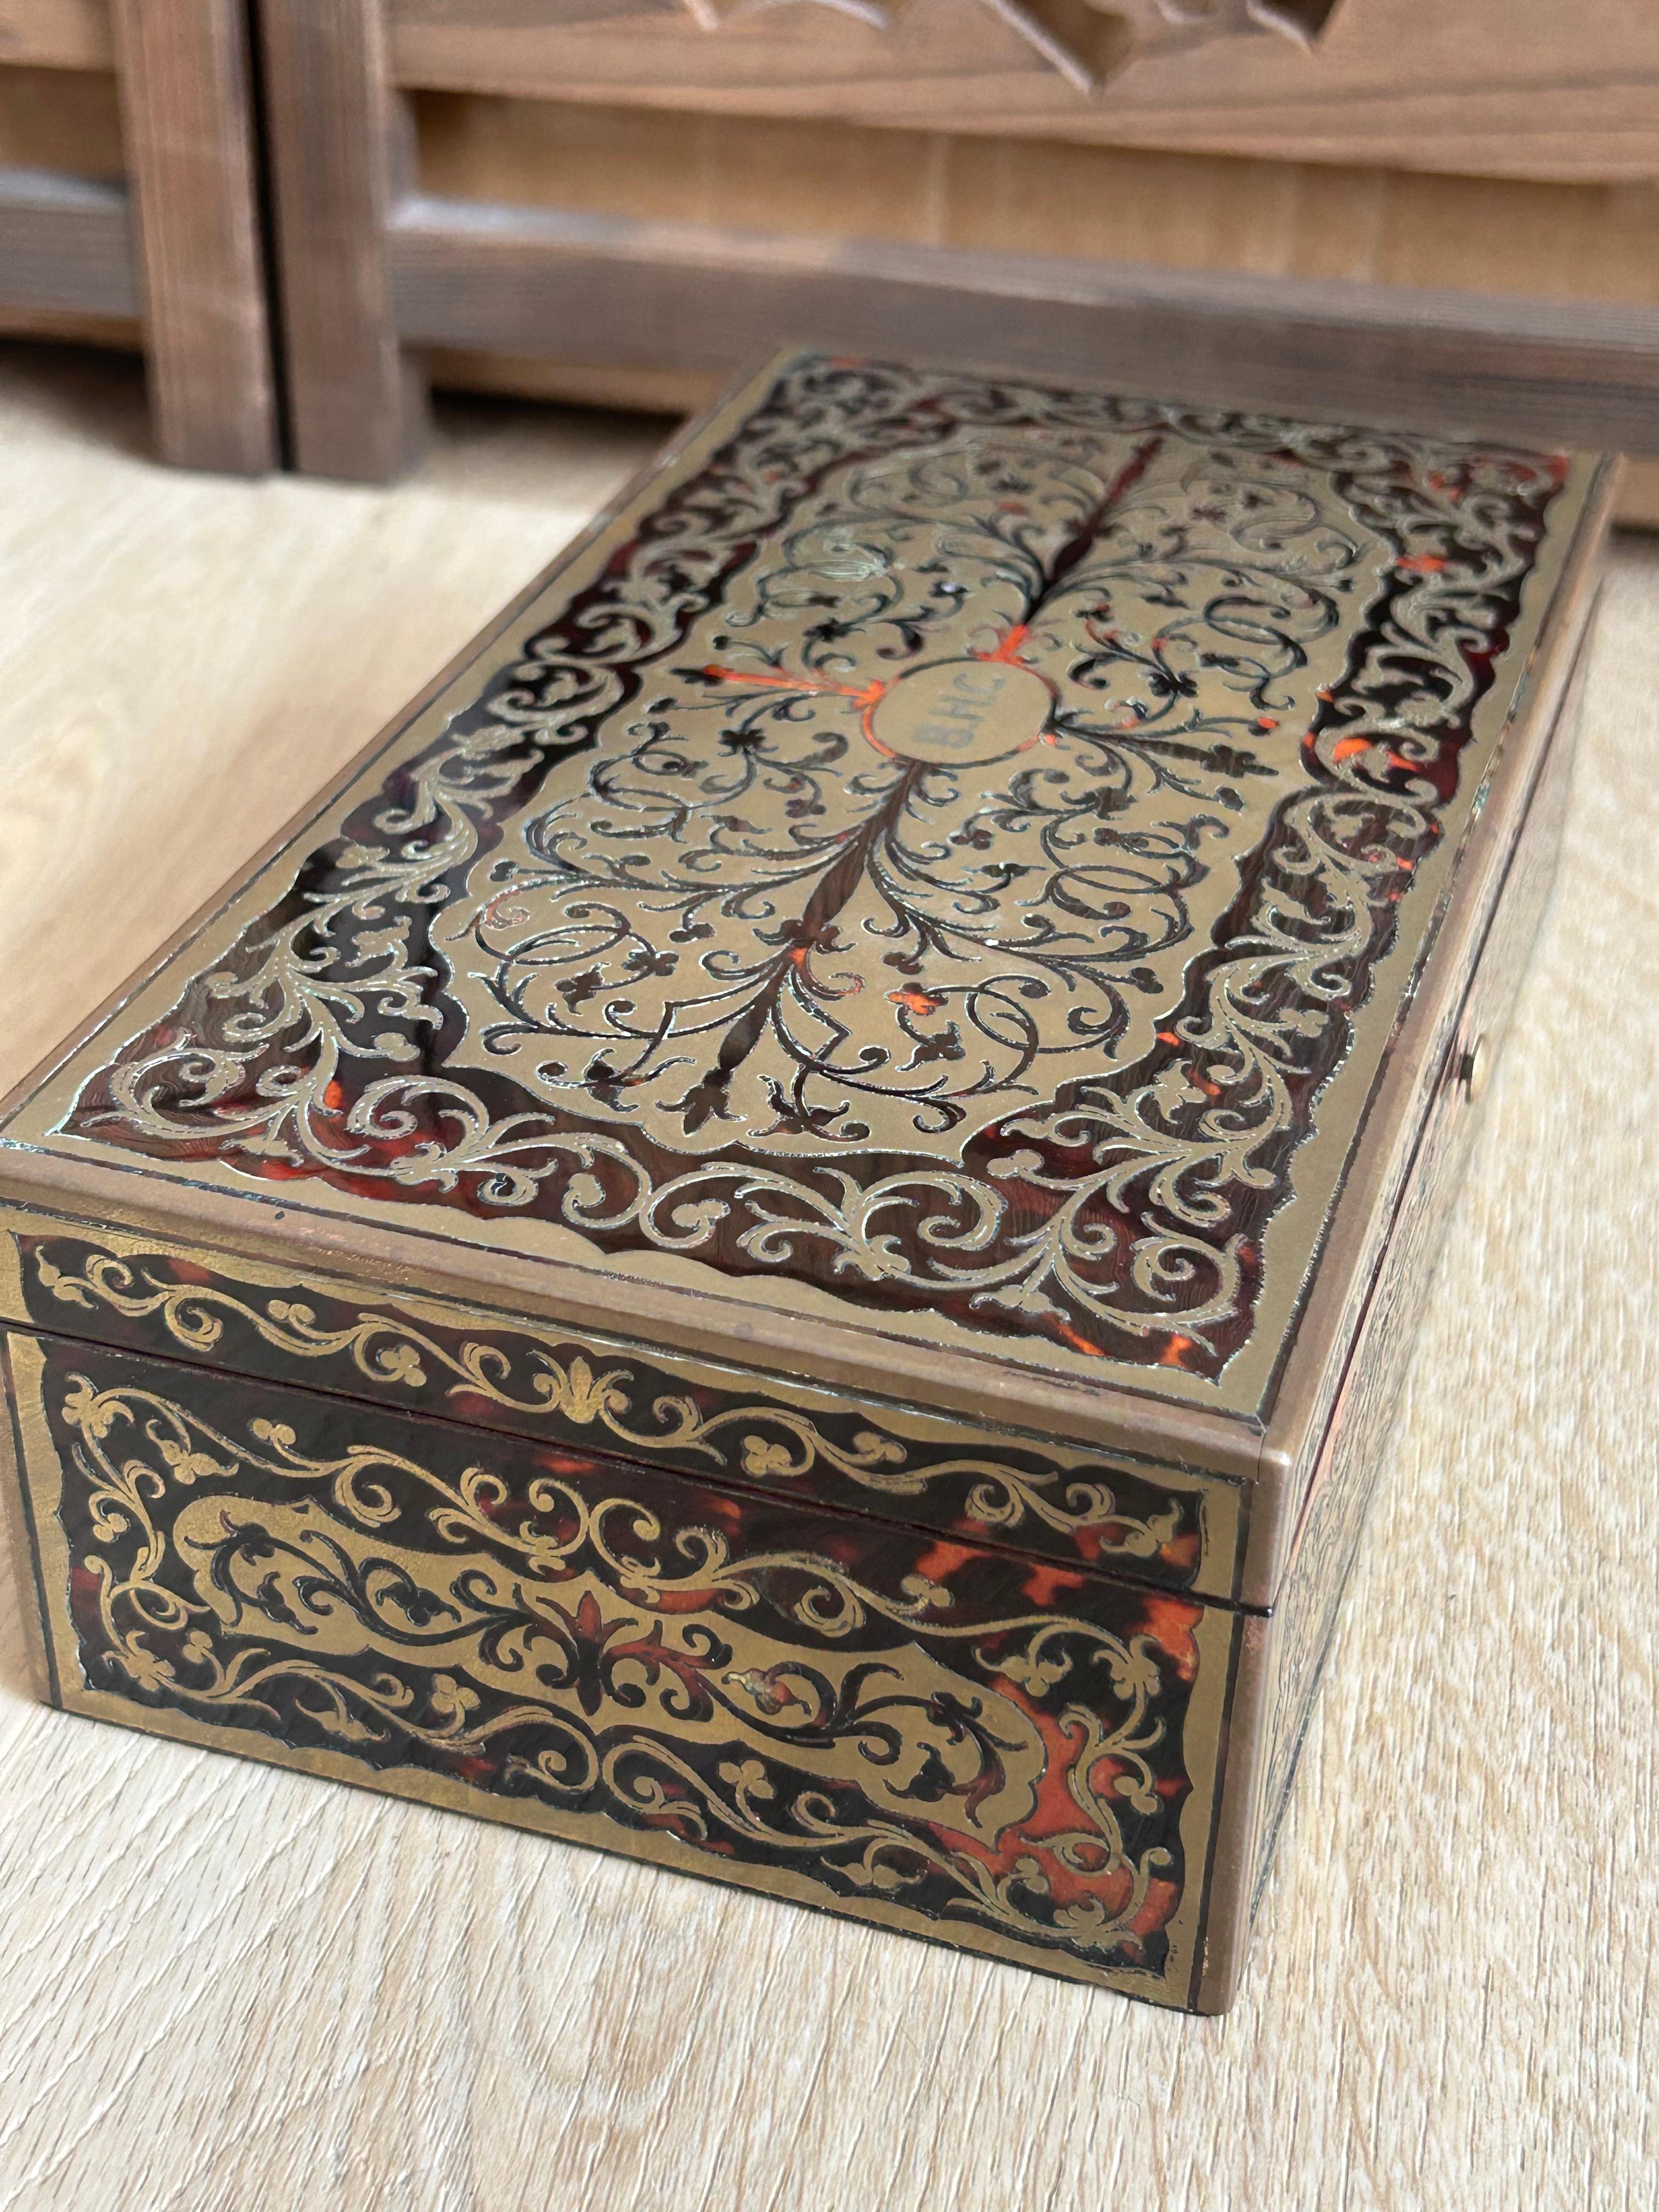 Tortoise Shell 1924 Boulle Card box For Sale